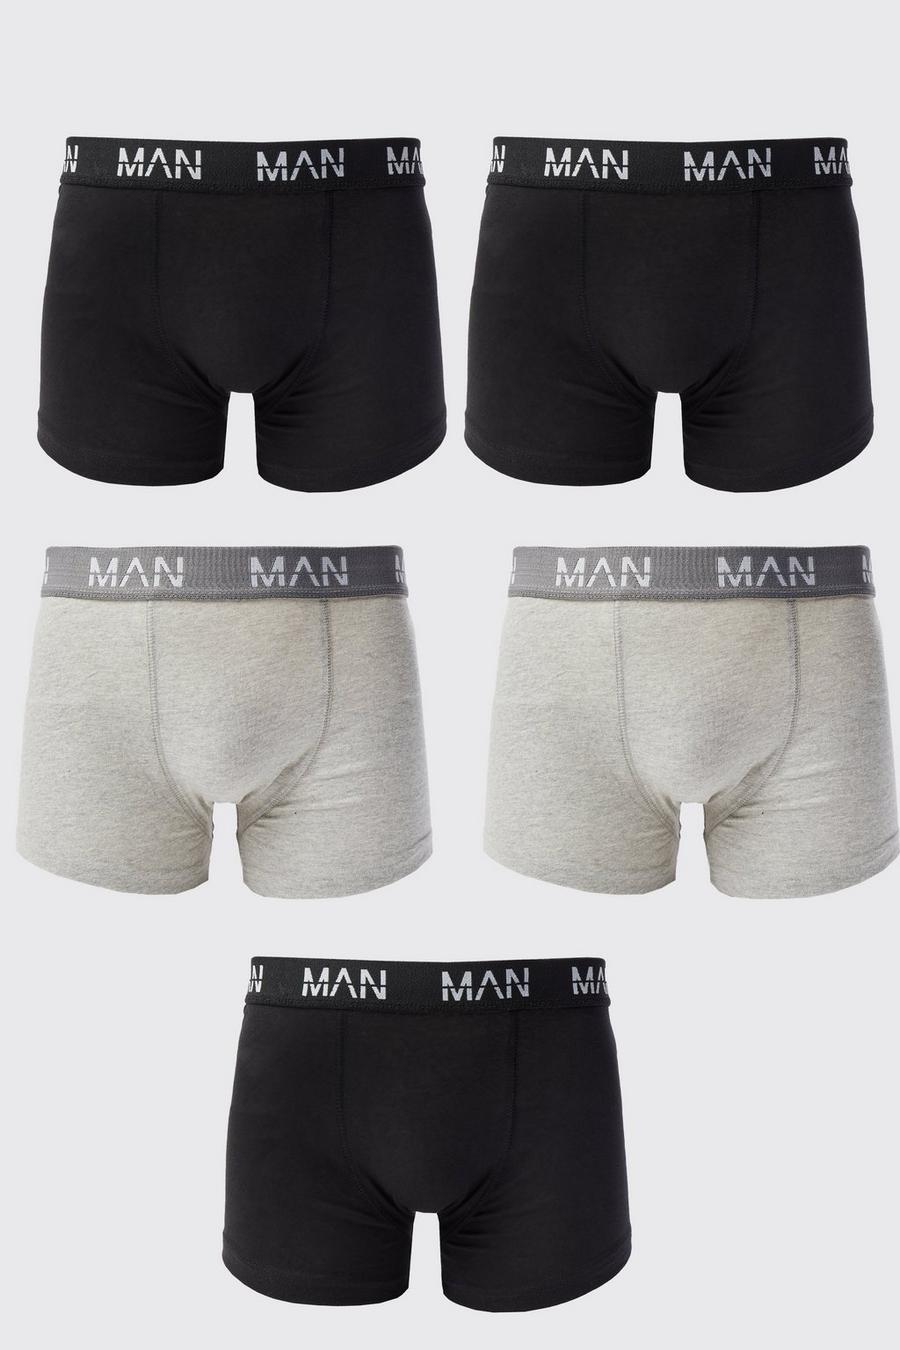 Multi 5 Pack Man Mixed Colour Trunks